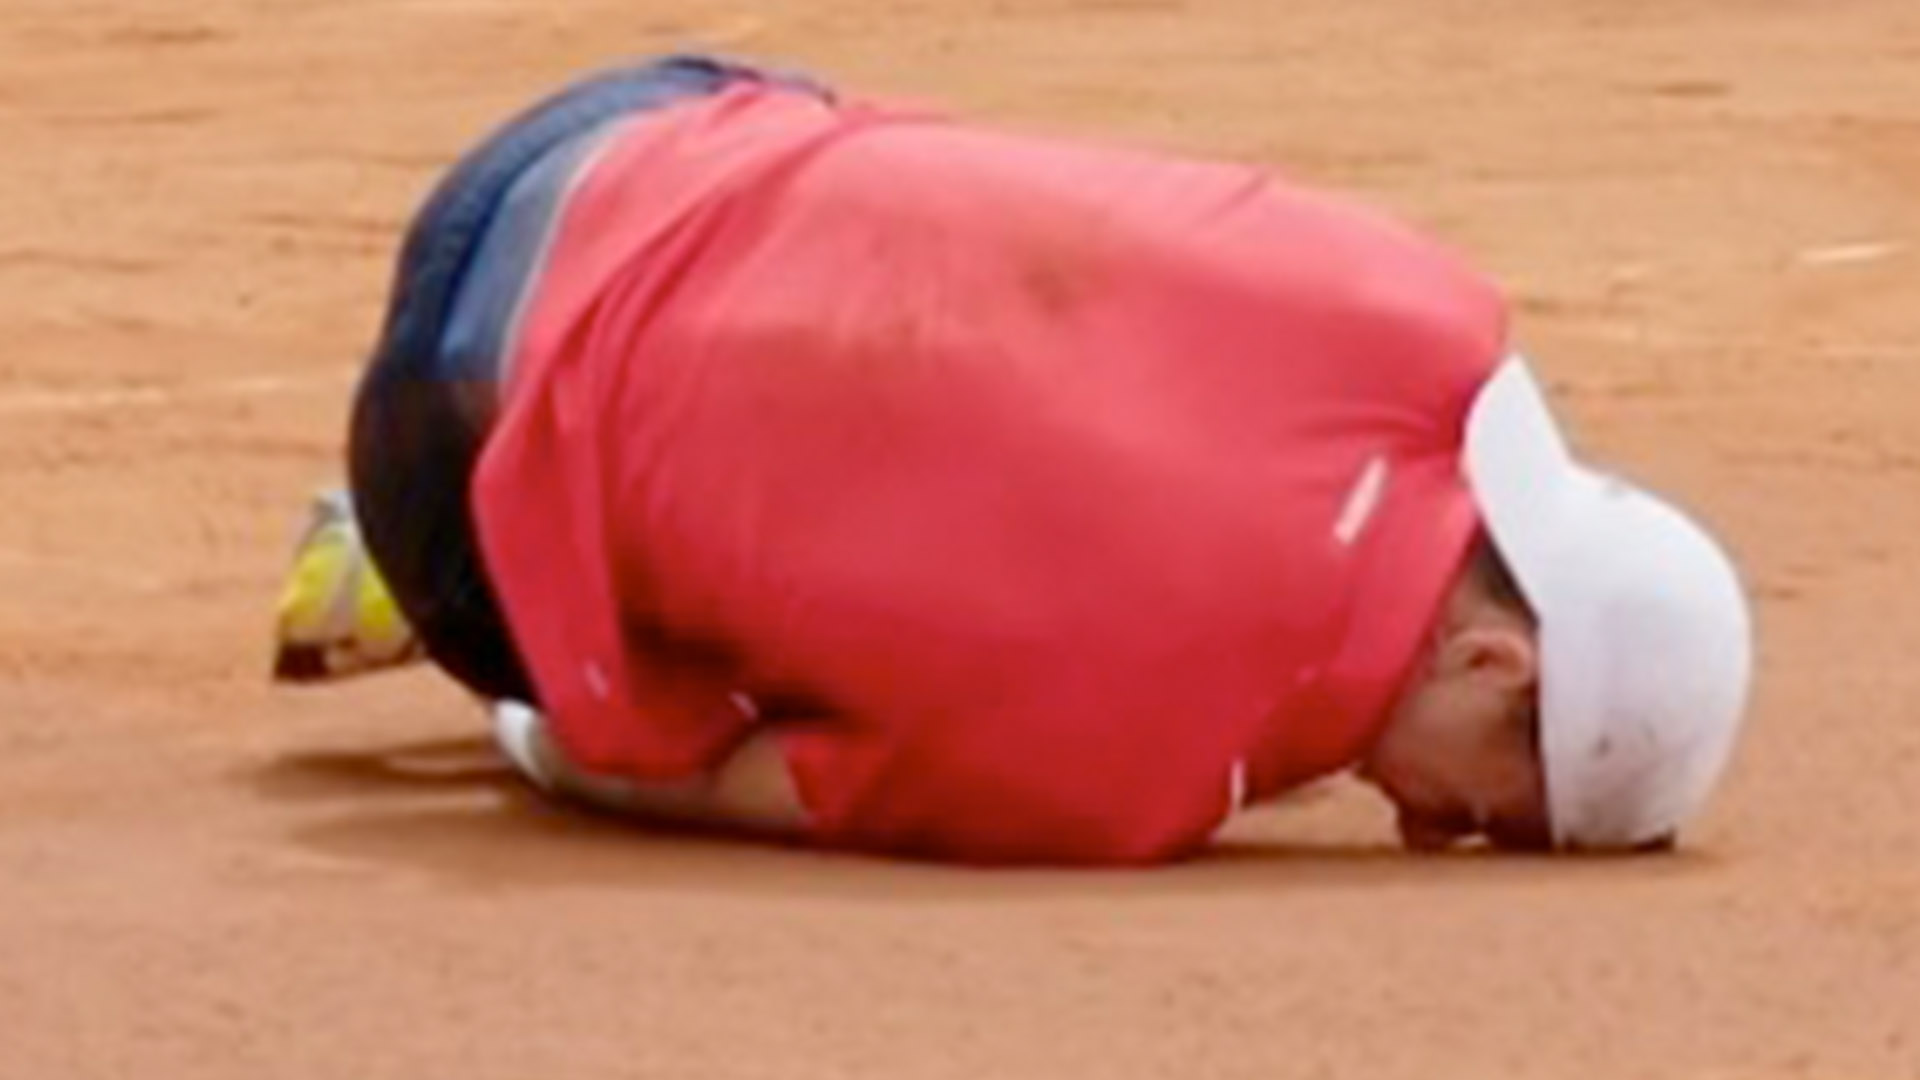 Tennis star shows off horror injury after collapsing to floor in agony and being forced to retire from tournament [Video]